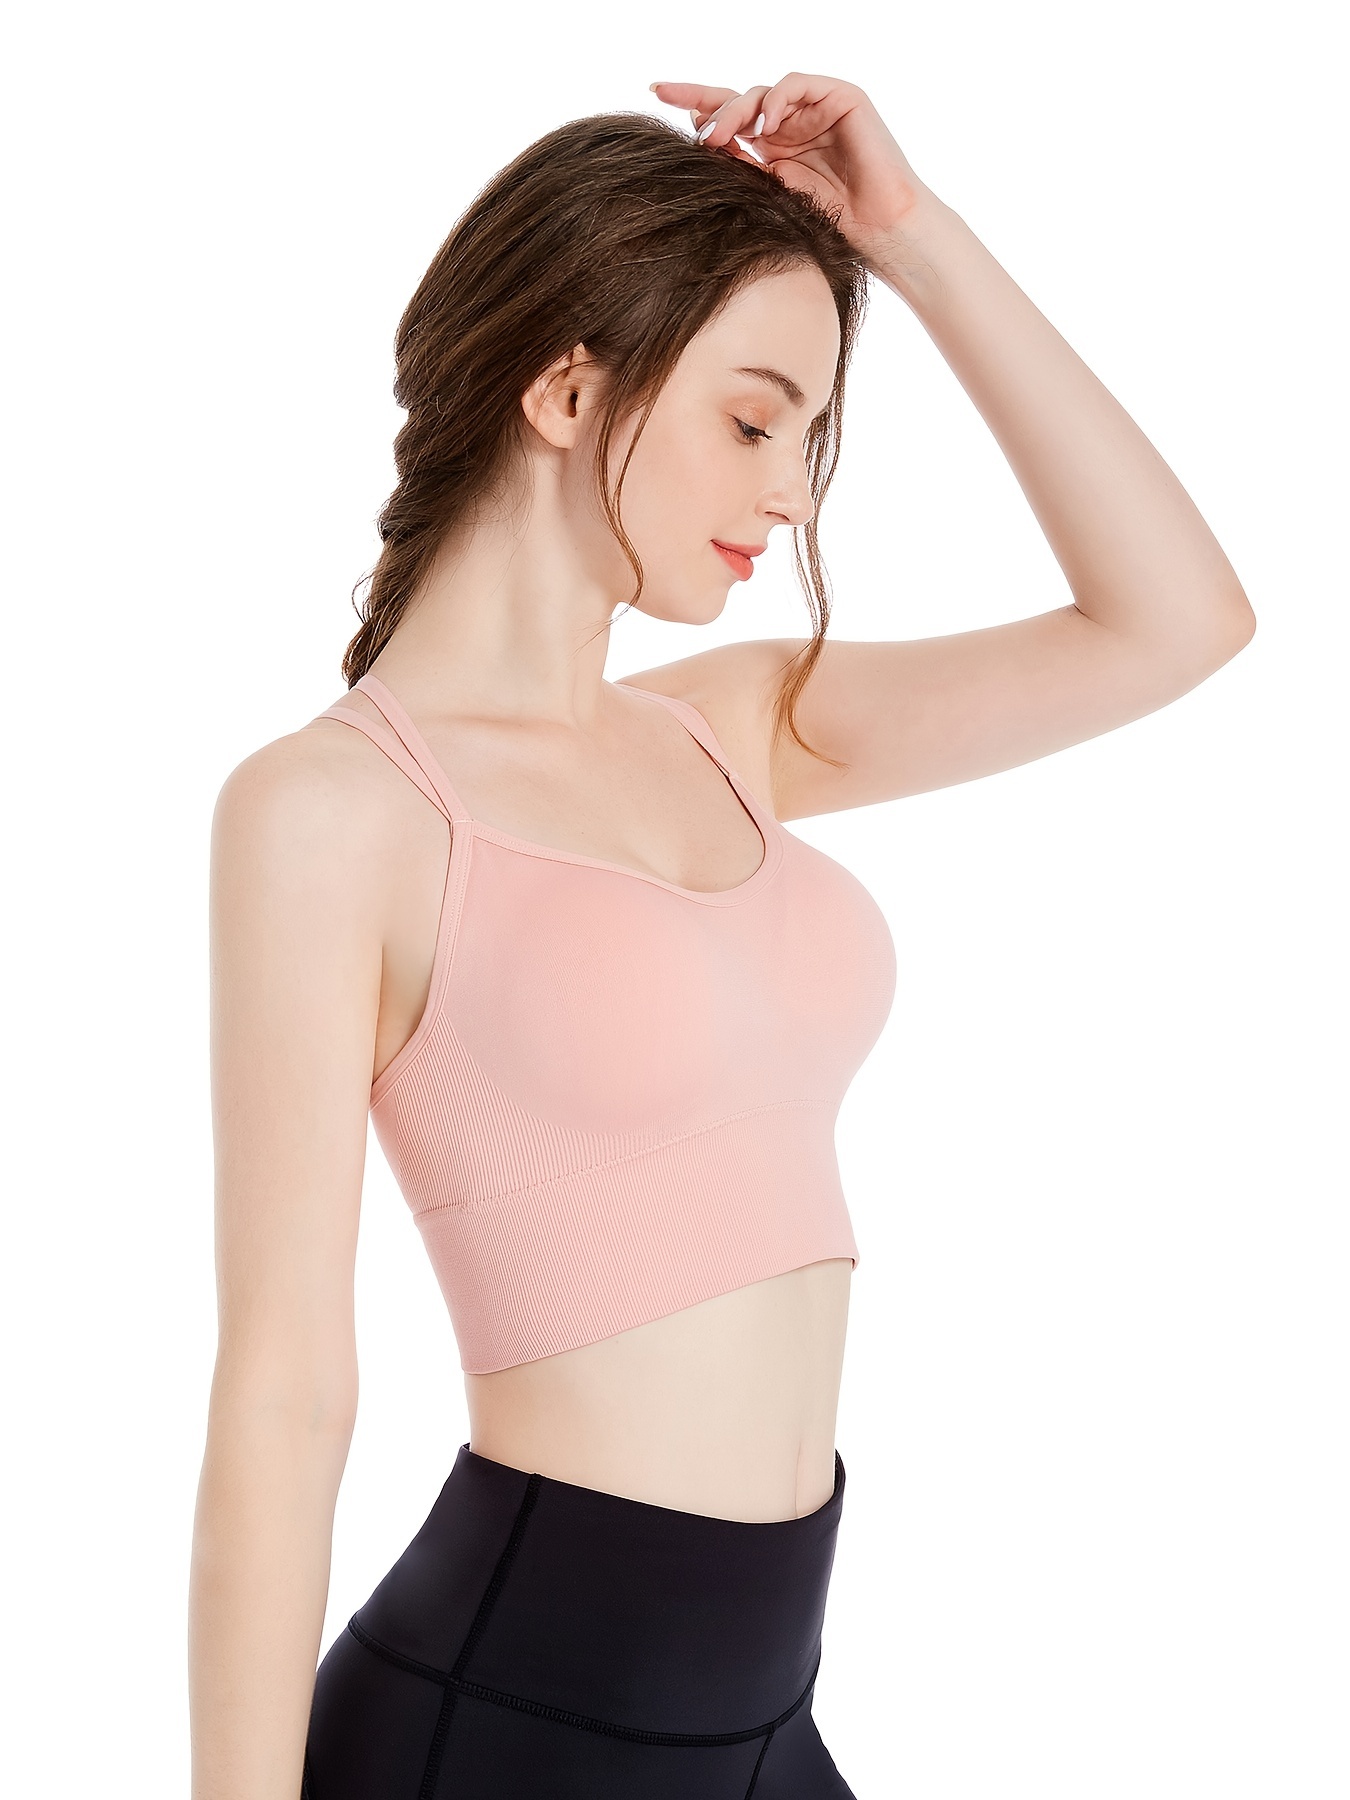 Backless Sports Bra For Women Gym Quick Dry Fitness Top Shockproof